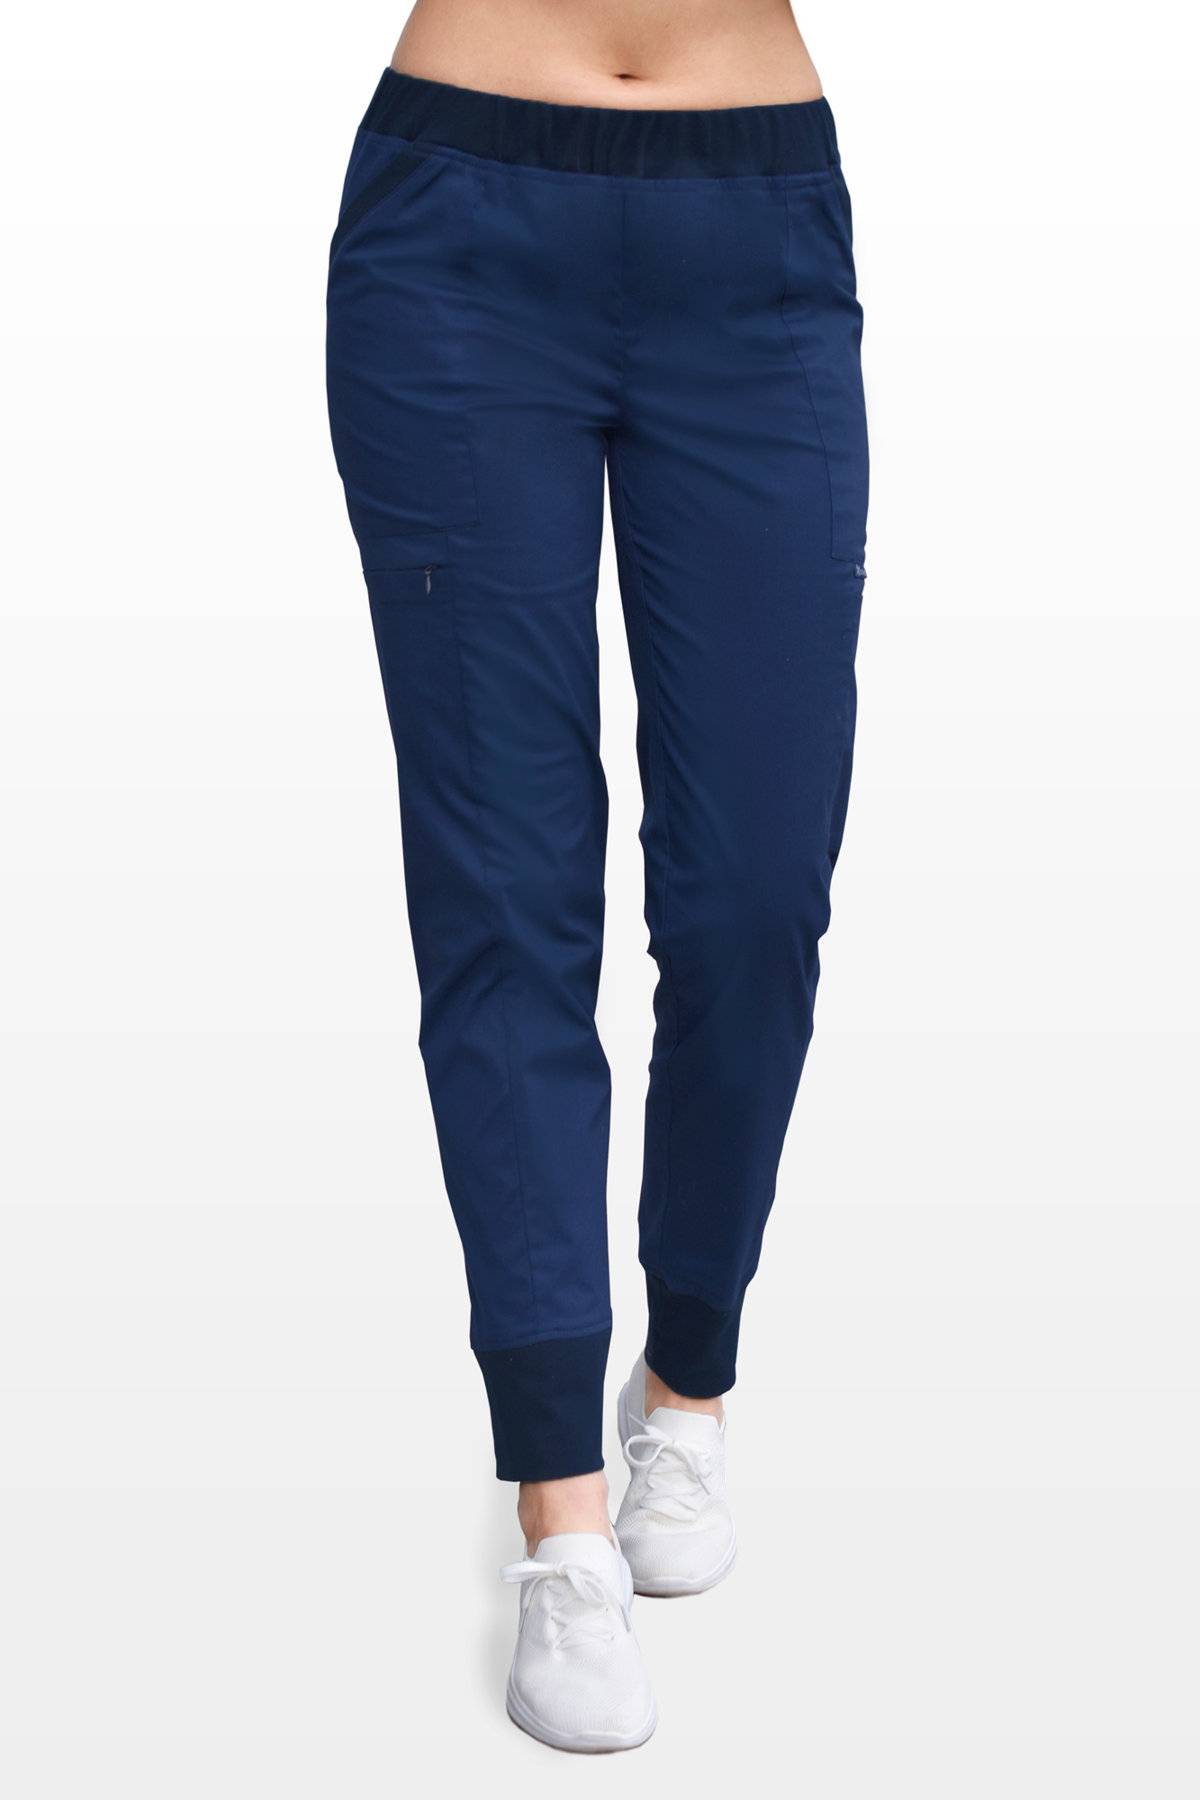 stripe, SE4-G2 with lime, SOFT blue + STRETCH, Scrubs a clothes | Medical COLORMED pants navy